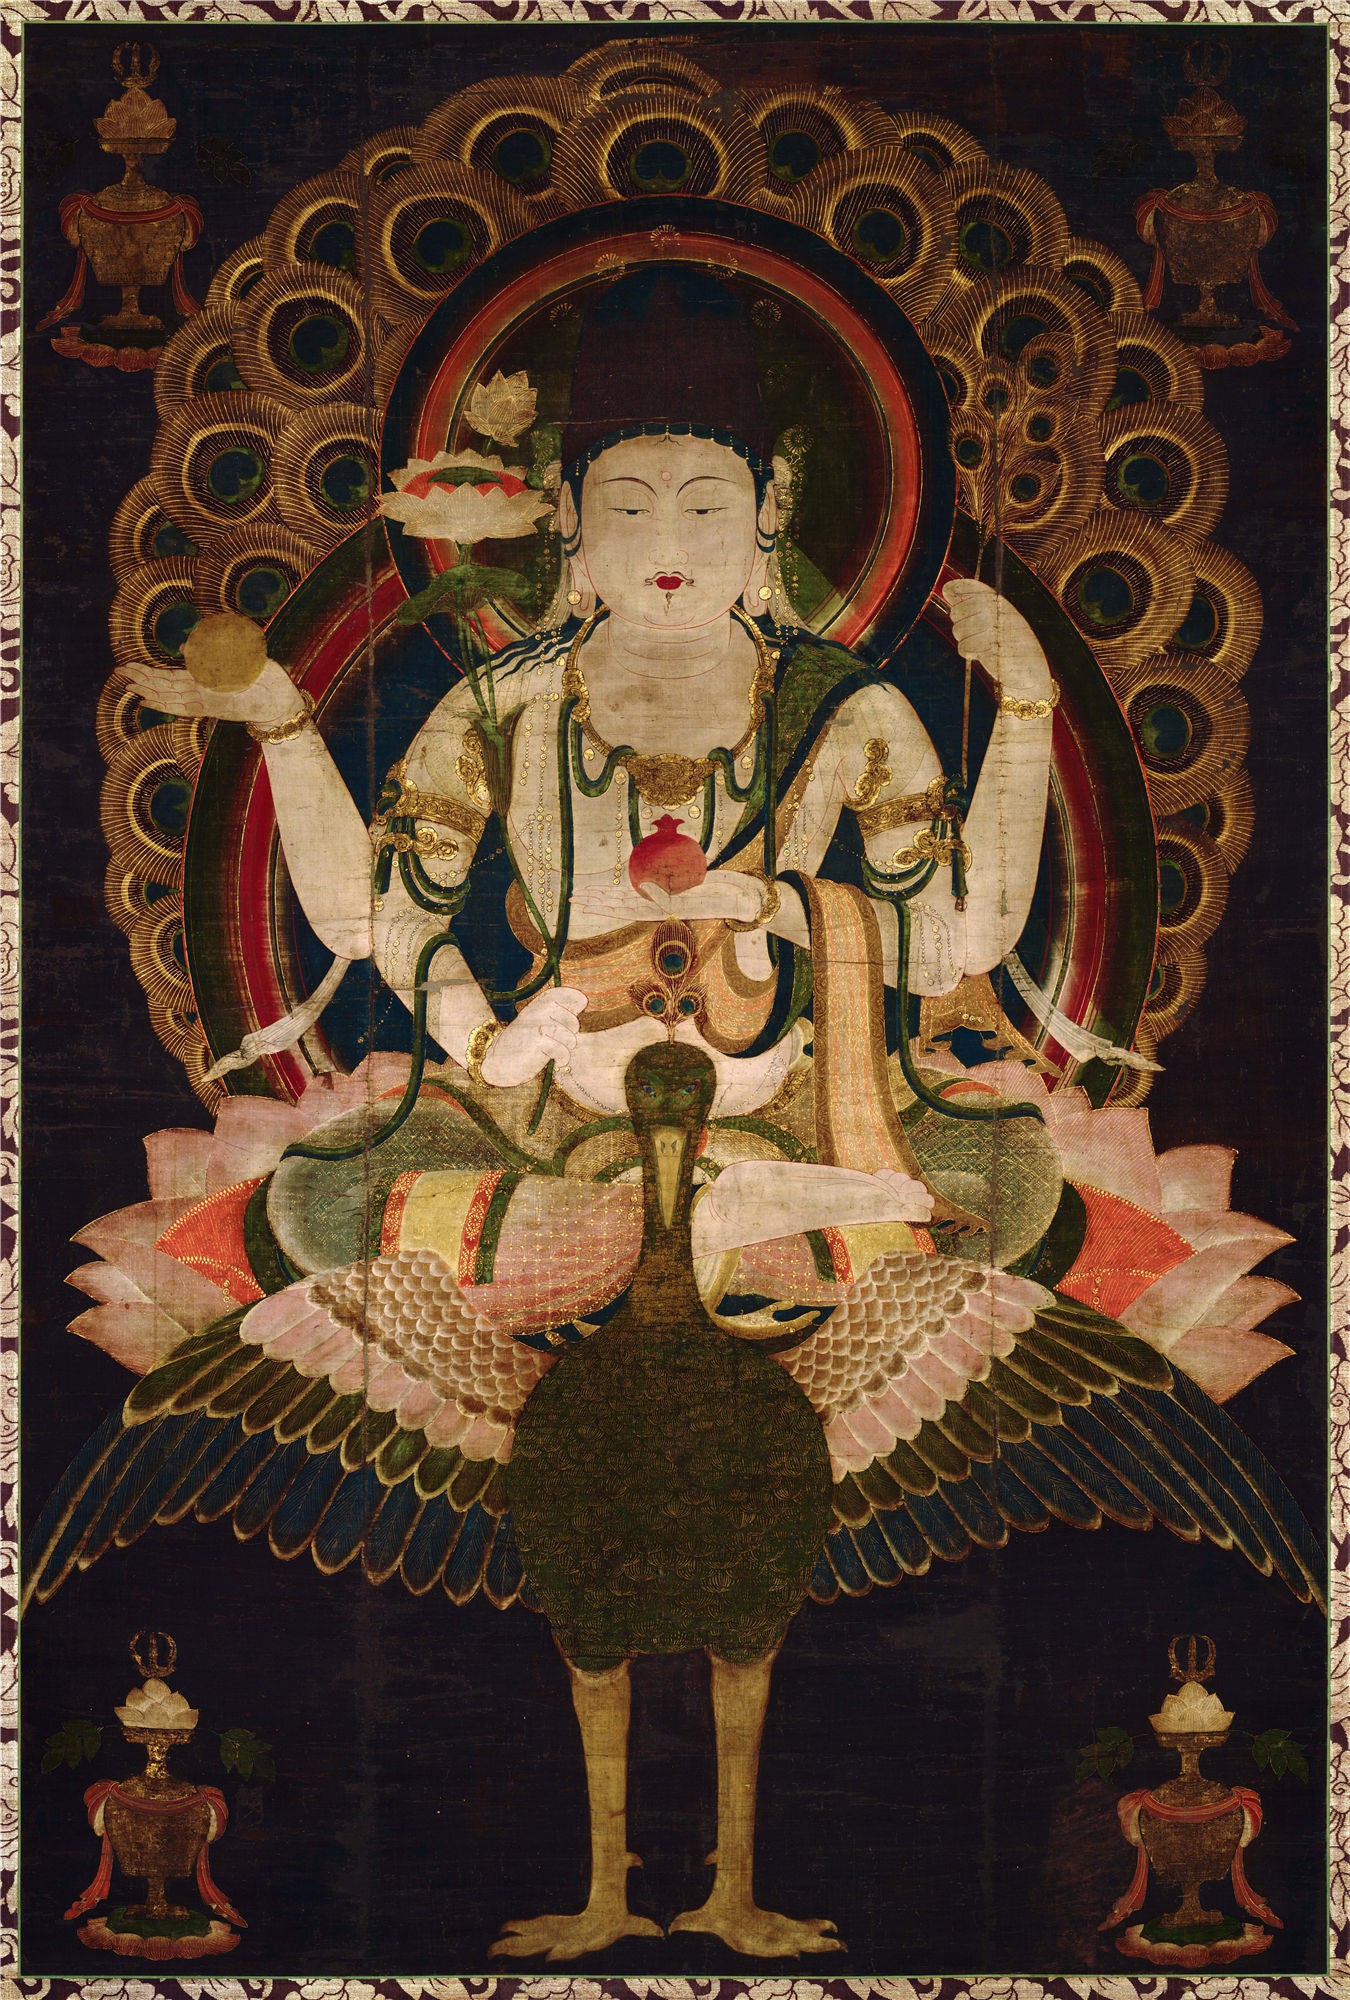 This image is Mahamayuri,Peacock Wisdom Queen,original painting is 12th century CE,Heian Period,Japan. This replica is giclee print with mineral pigments,and hand framed. Giclee print (French Giclée) is an exact replica of the original thangka, made with high-resolution digital print on tibetan canvas and produced in limited edition.